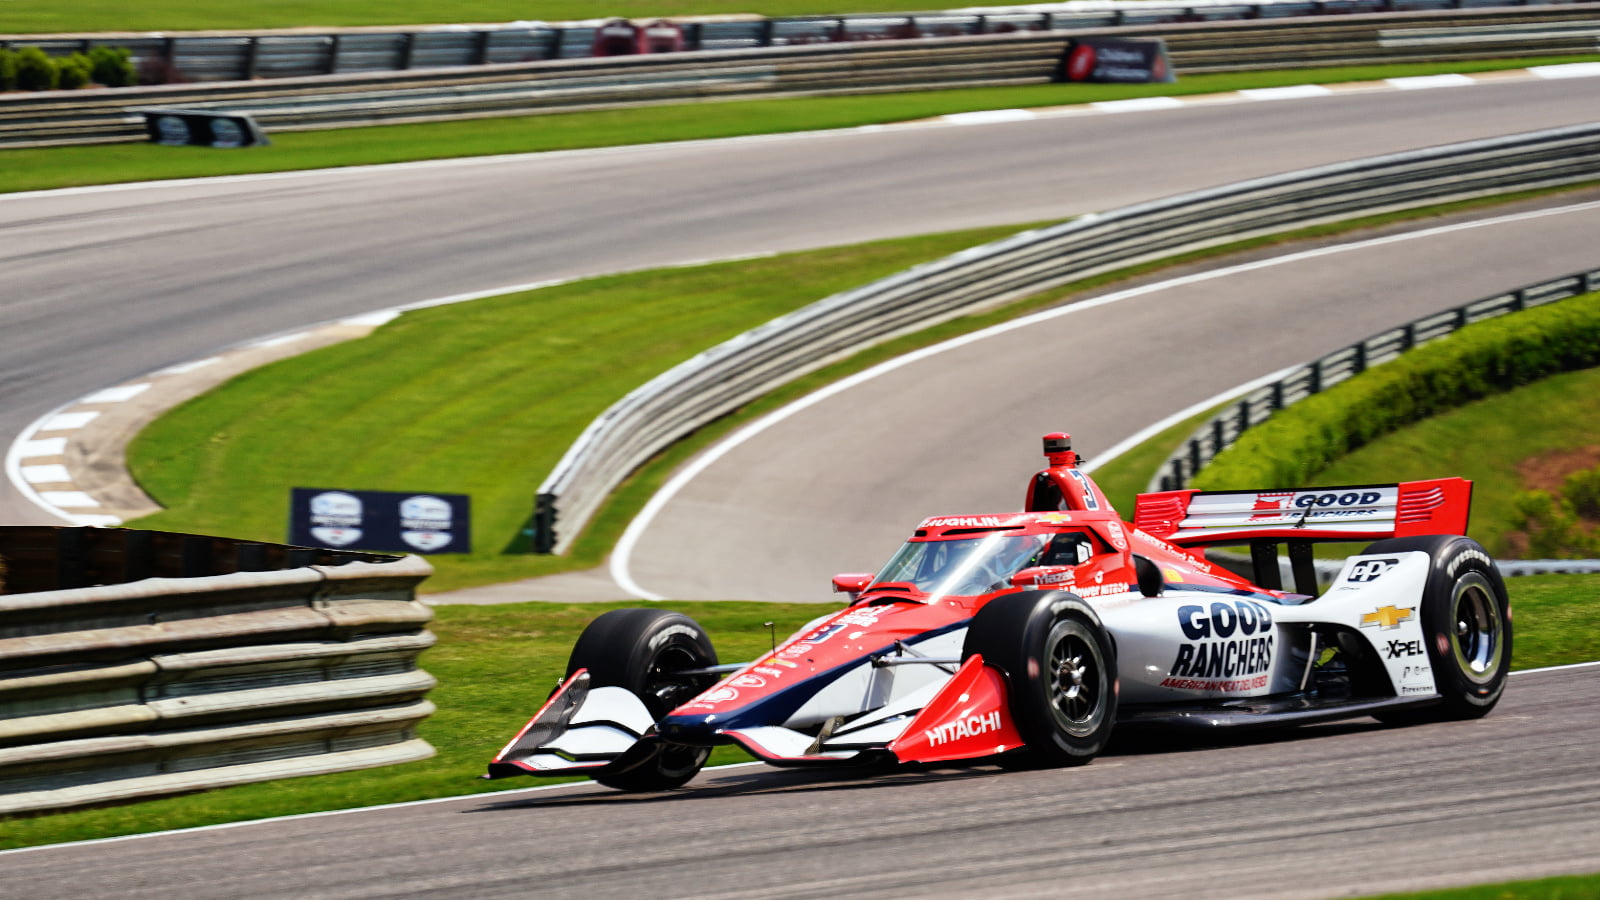 Roaring Success: A Look at the Thrilling Qualifying Results from IndyCar Barber